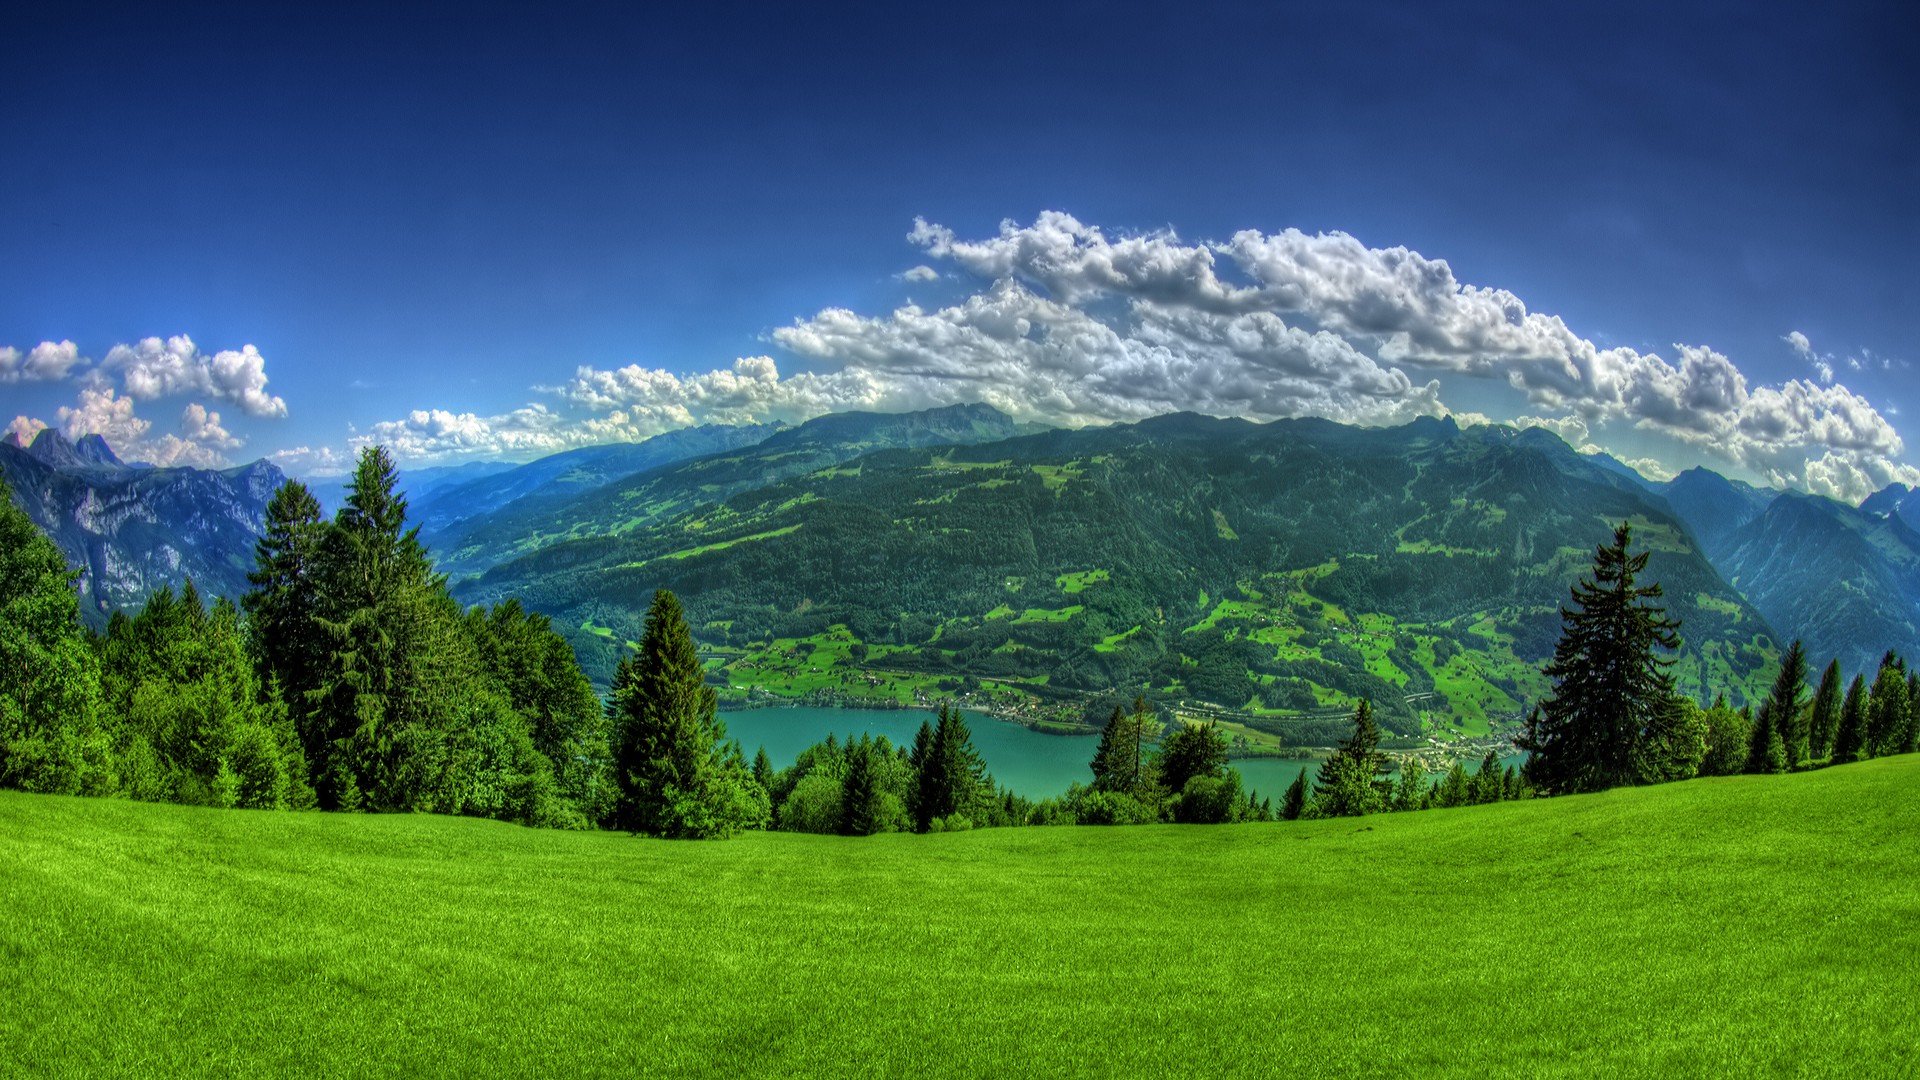 #nature, #landscape, #hills, #green, #trees, #water, #sky, # Switzerland, #sea, #Walensee, #clouds, #lake, #mountains, #grass, wallpaper Gallery HD Wallpaper